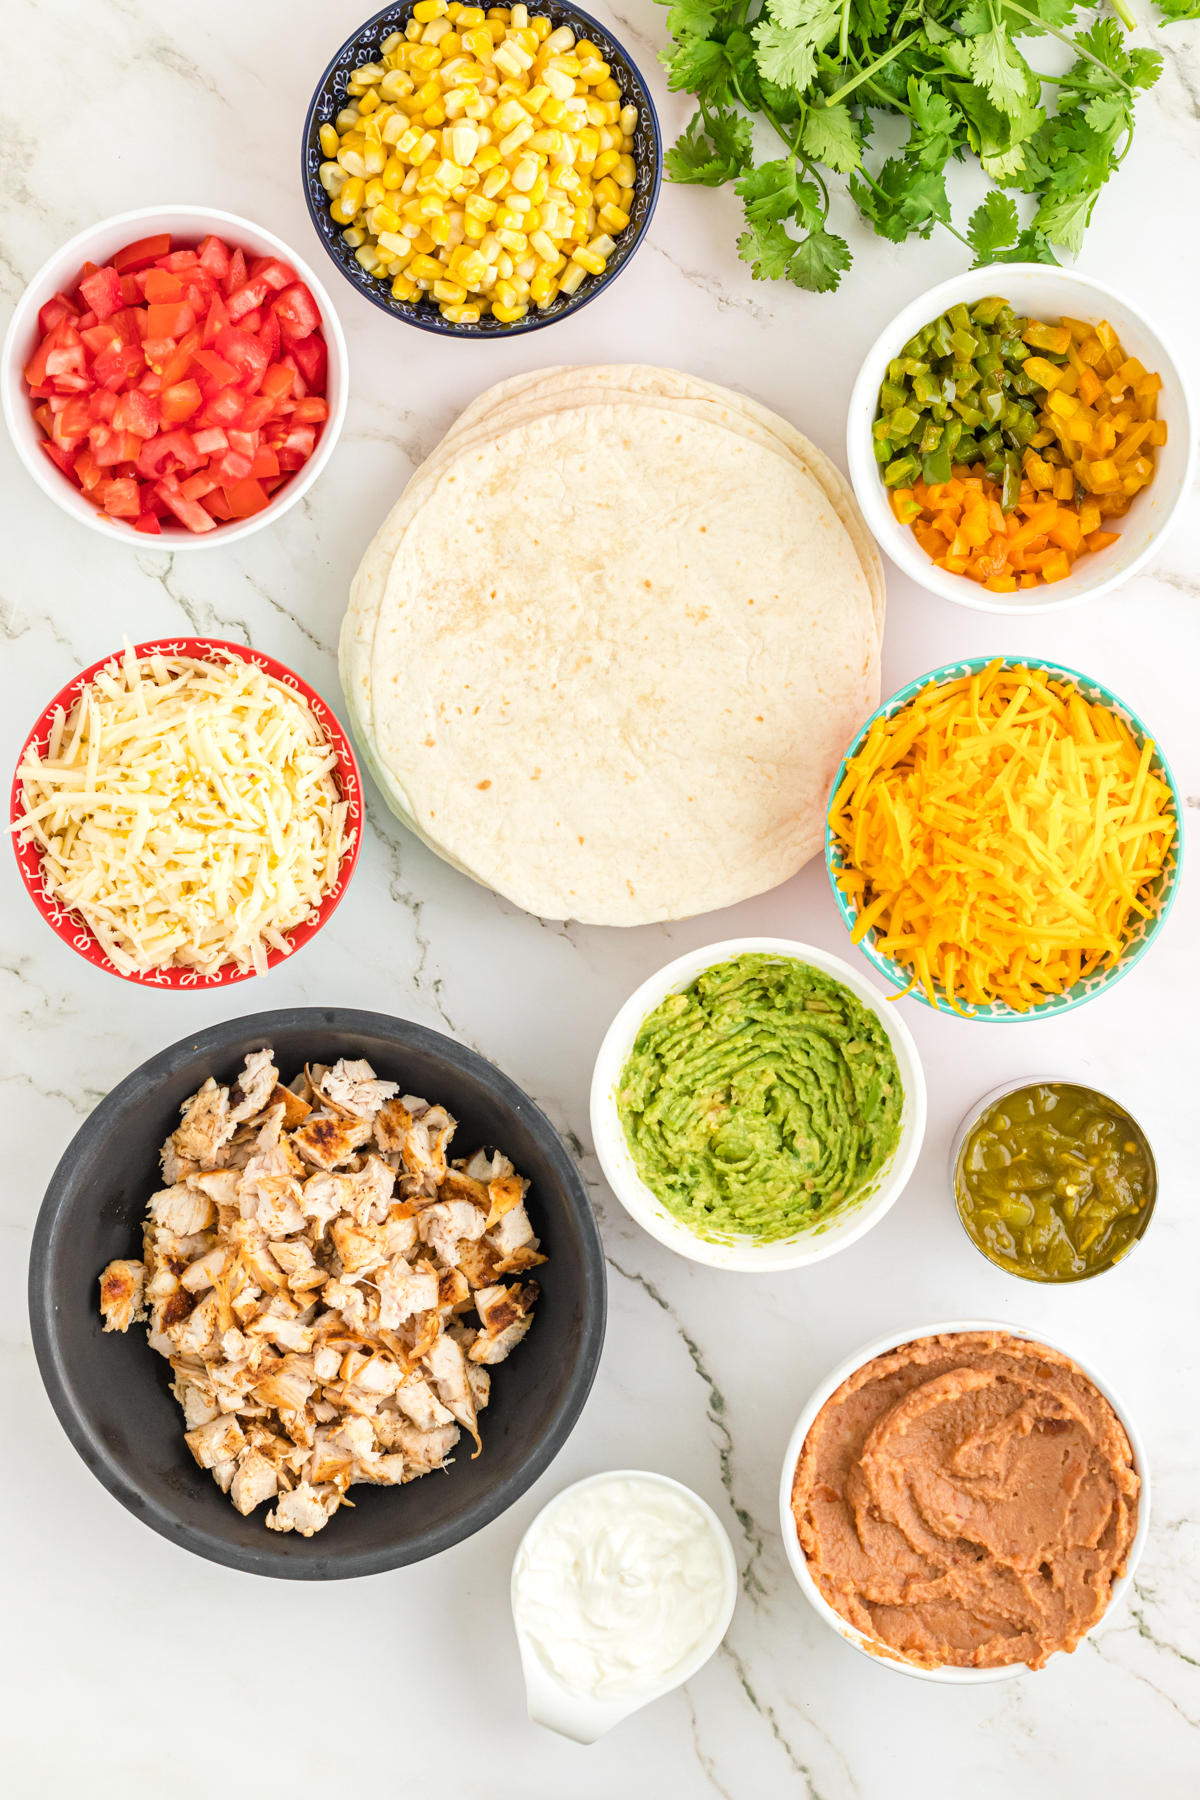 Ingredients for waffle quesadillas.
